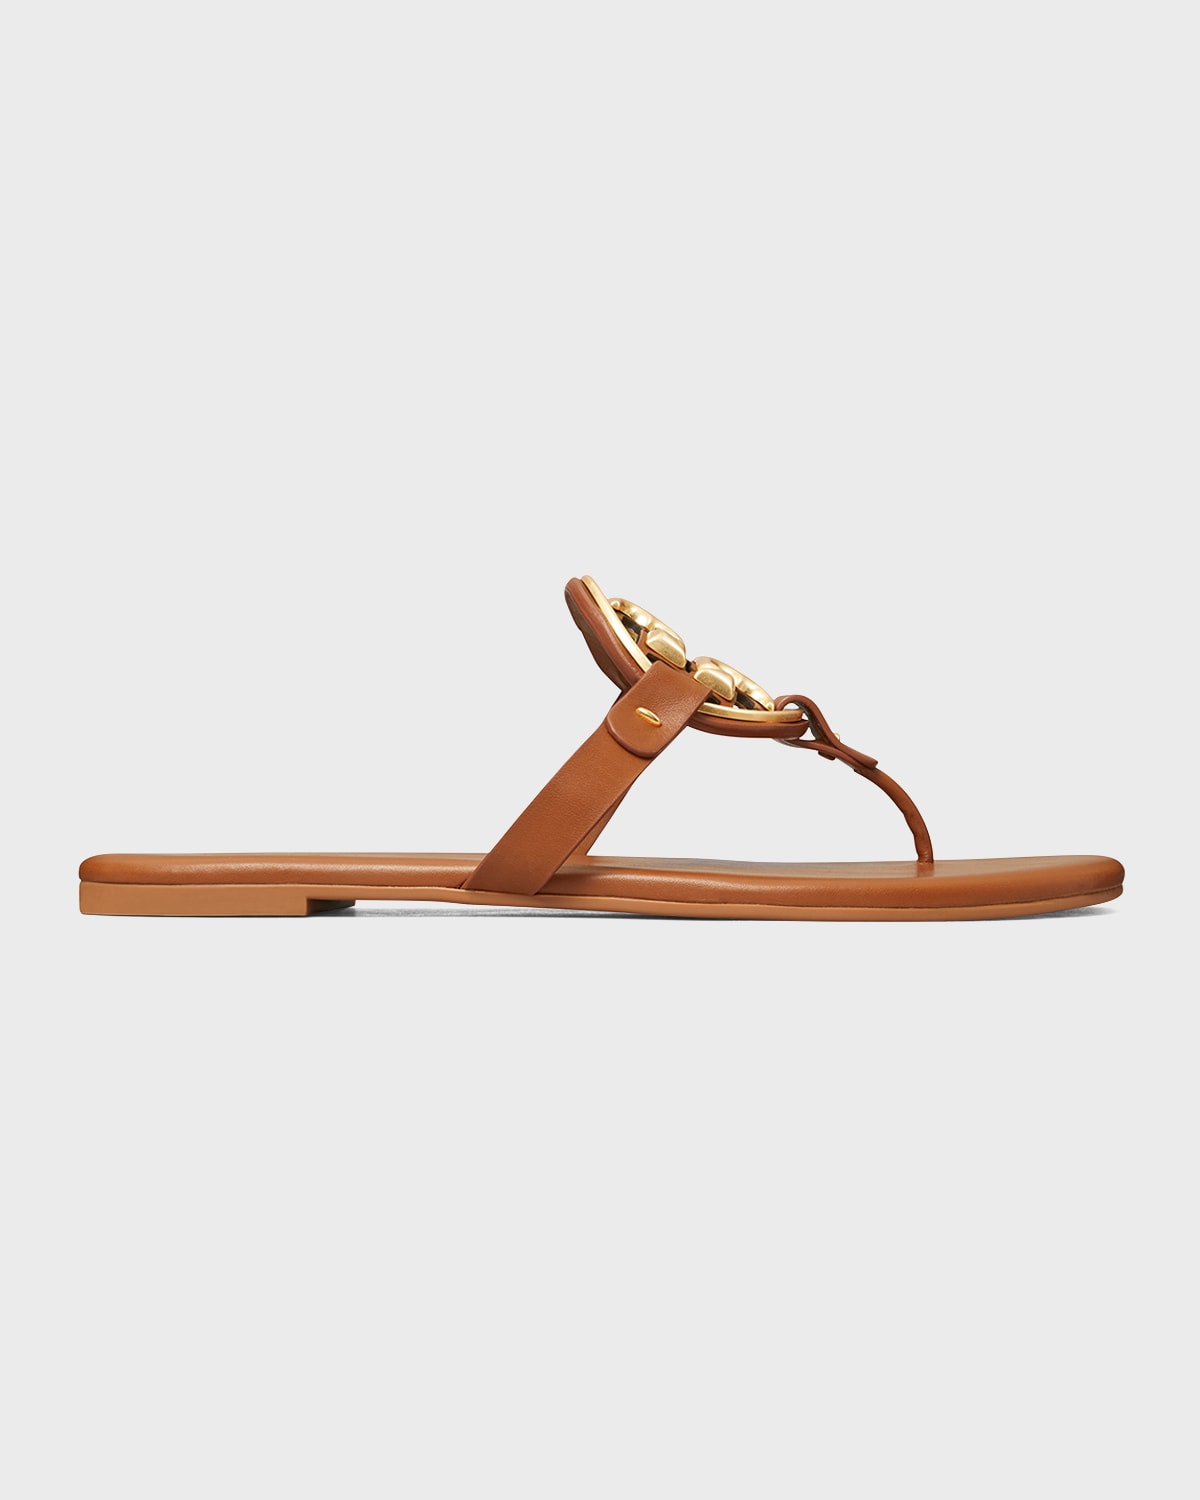 Tory Burch Imported Sandals | Neiman Marcus